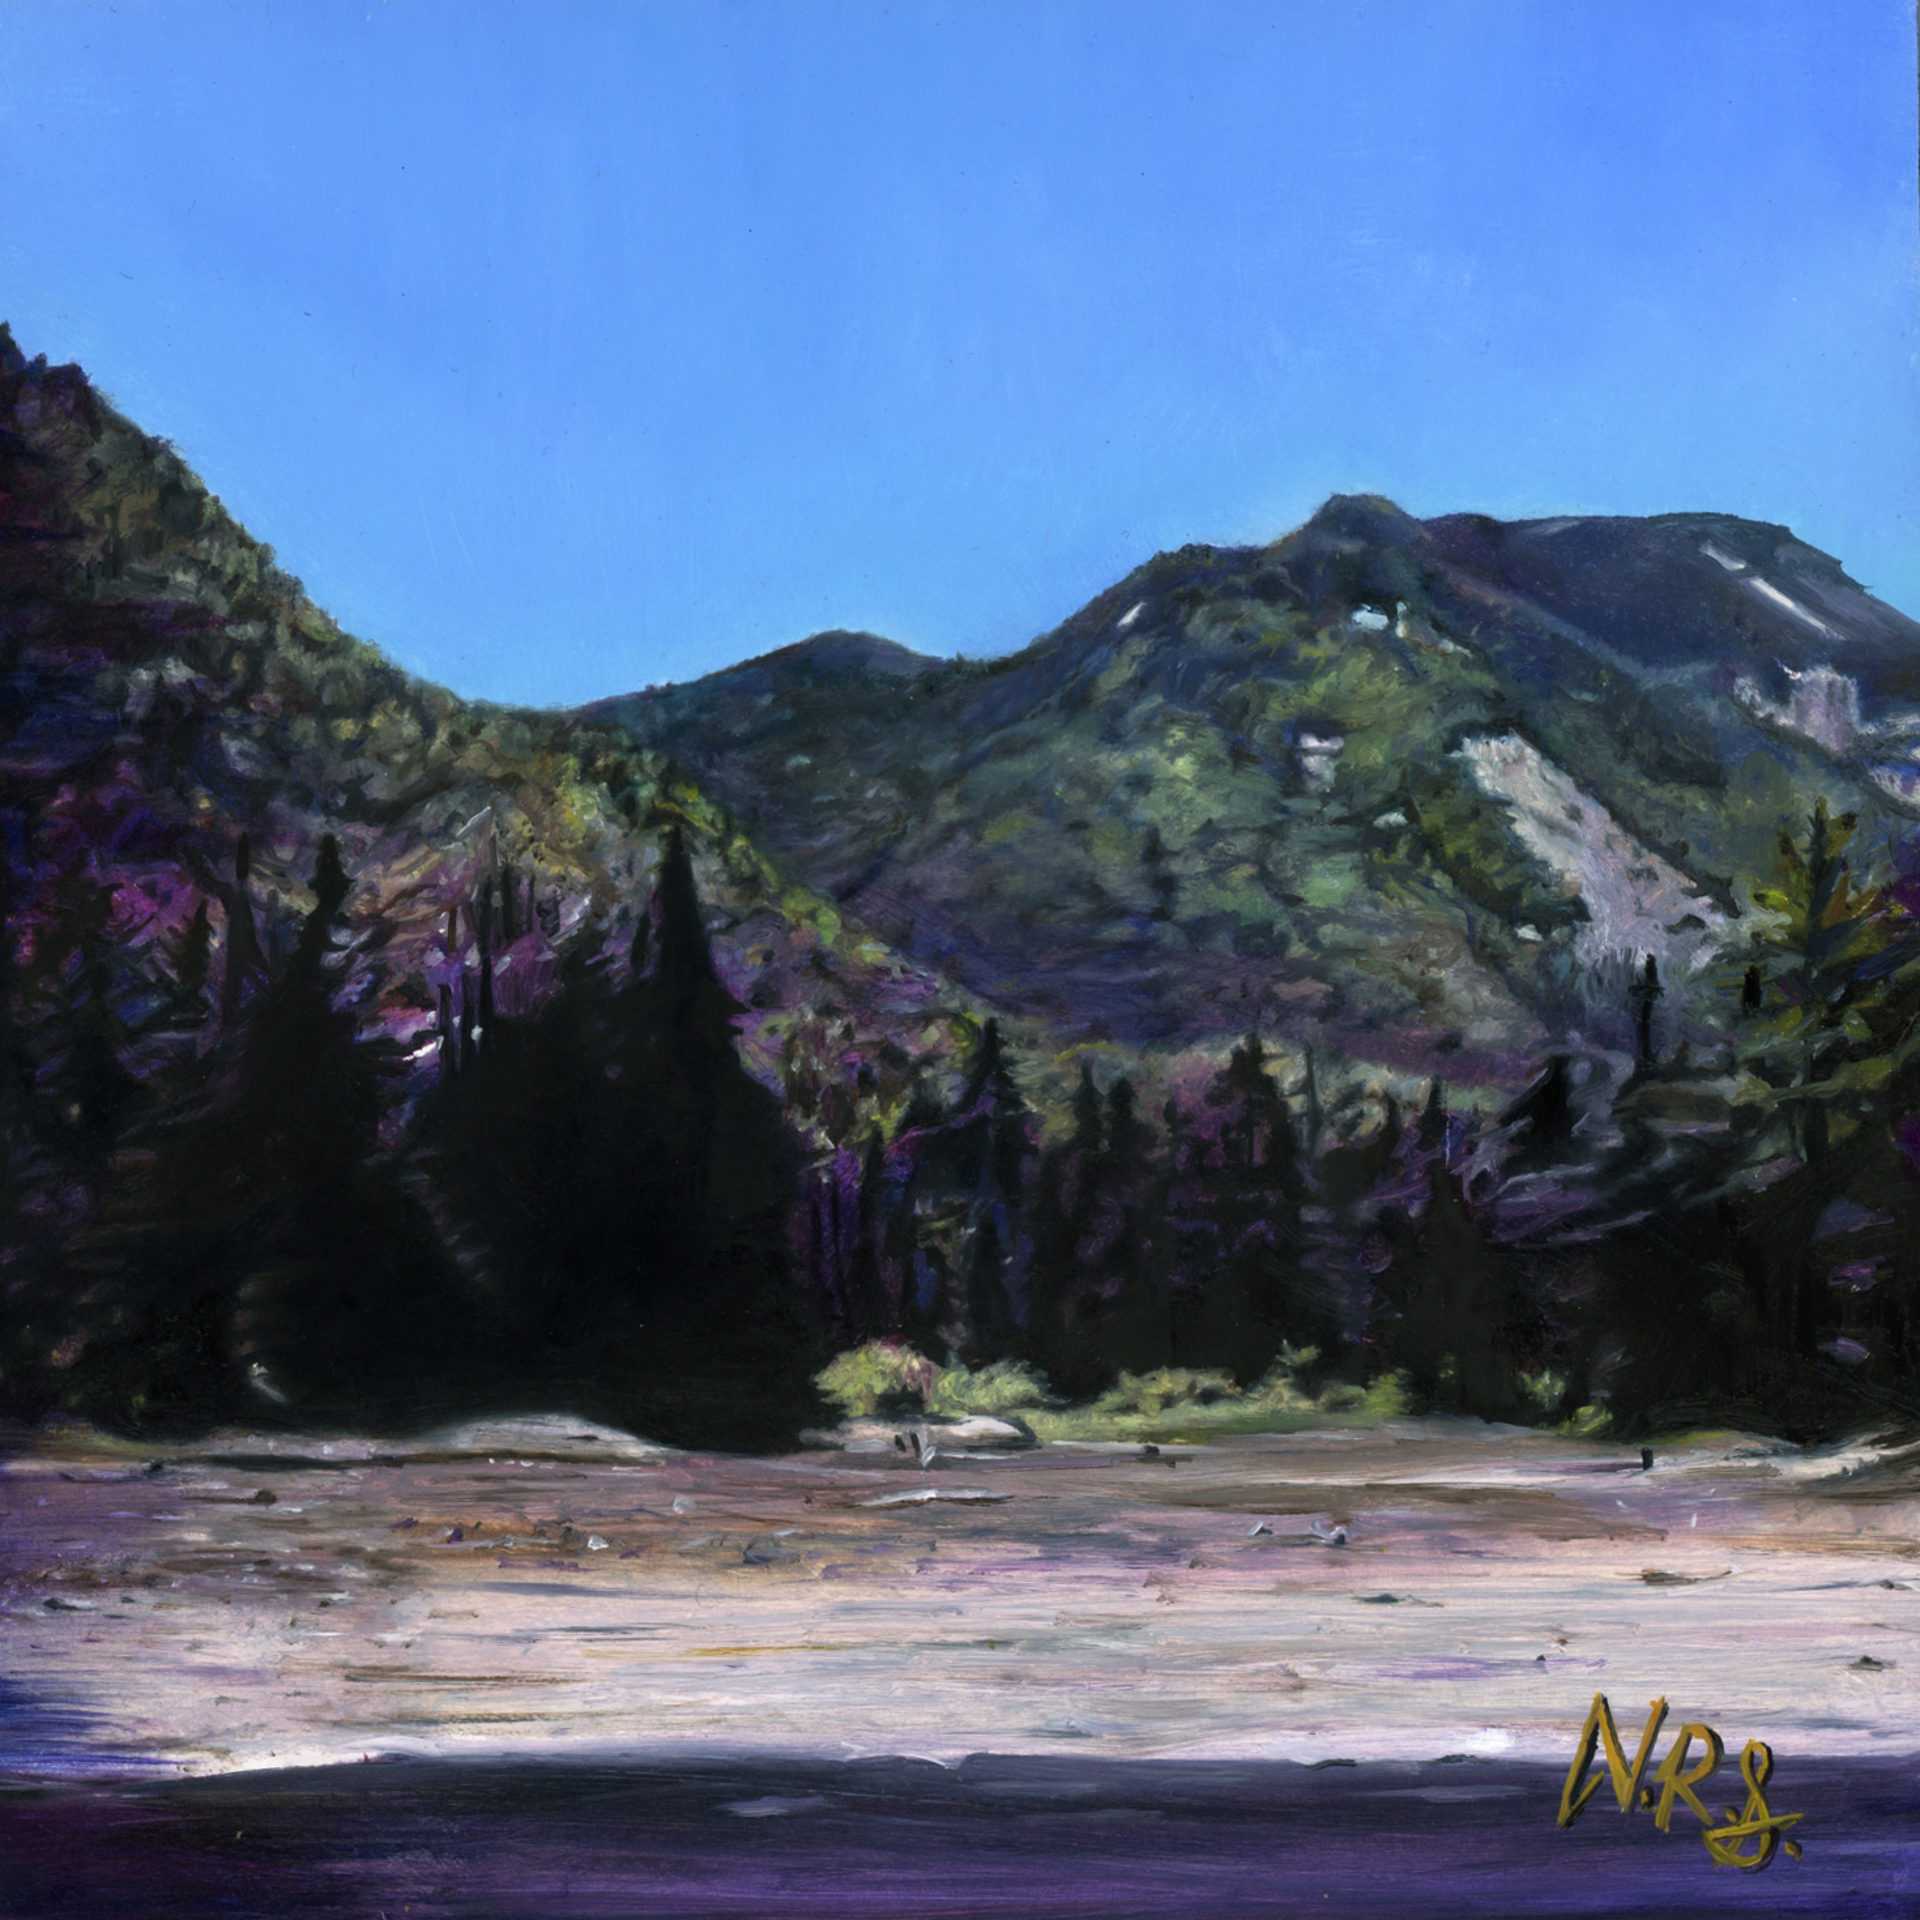 Victoria Steel - Adirondack View Oil on wood panel 5 x 5 in $600.00